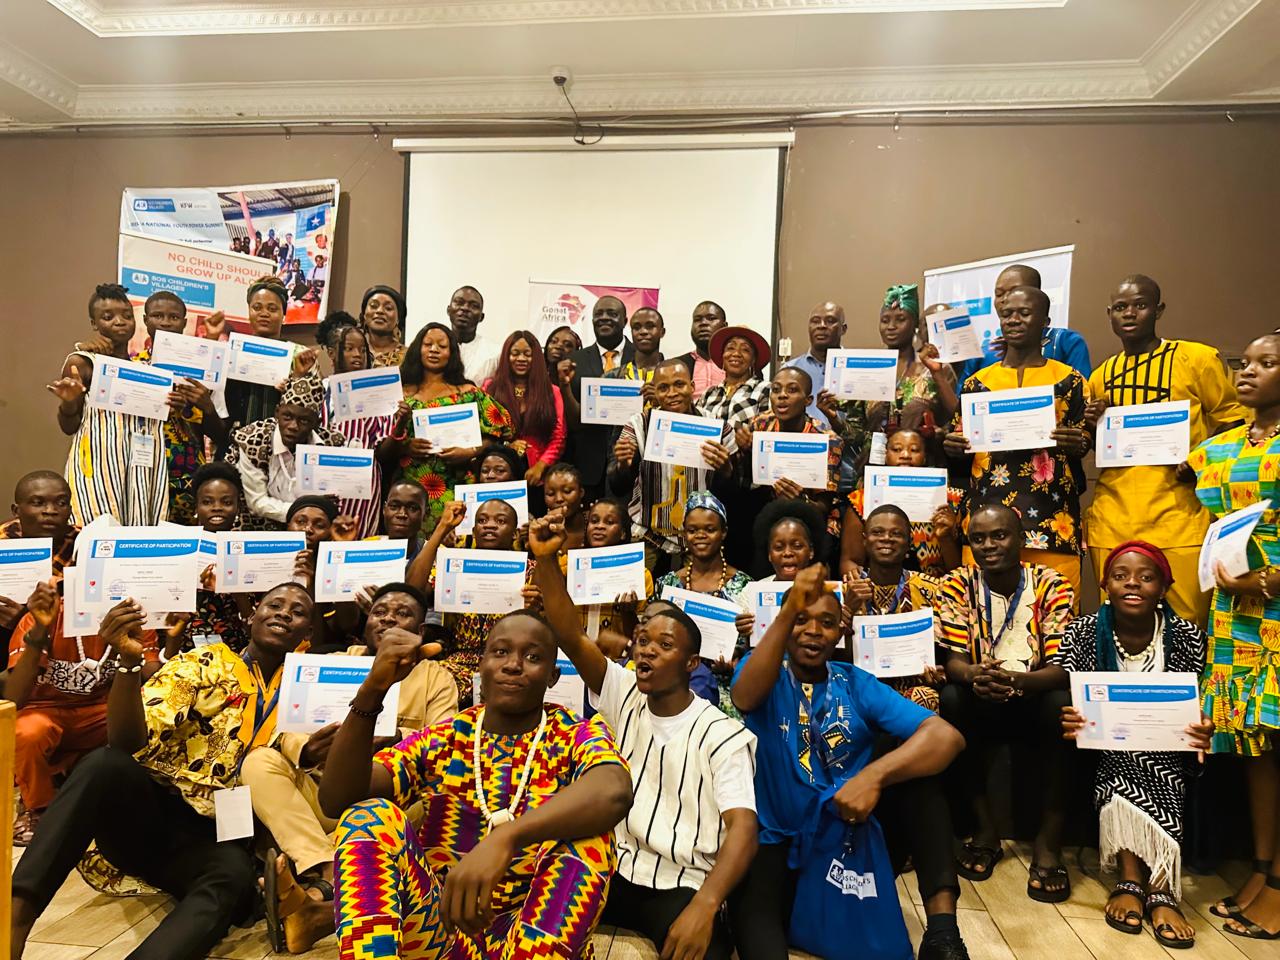 Youth Leading the Way: SOS Children’s Villages and KfW Stiftung sponsored National Youth Power Summit in Liberia strengthen Change Makers for Progress